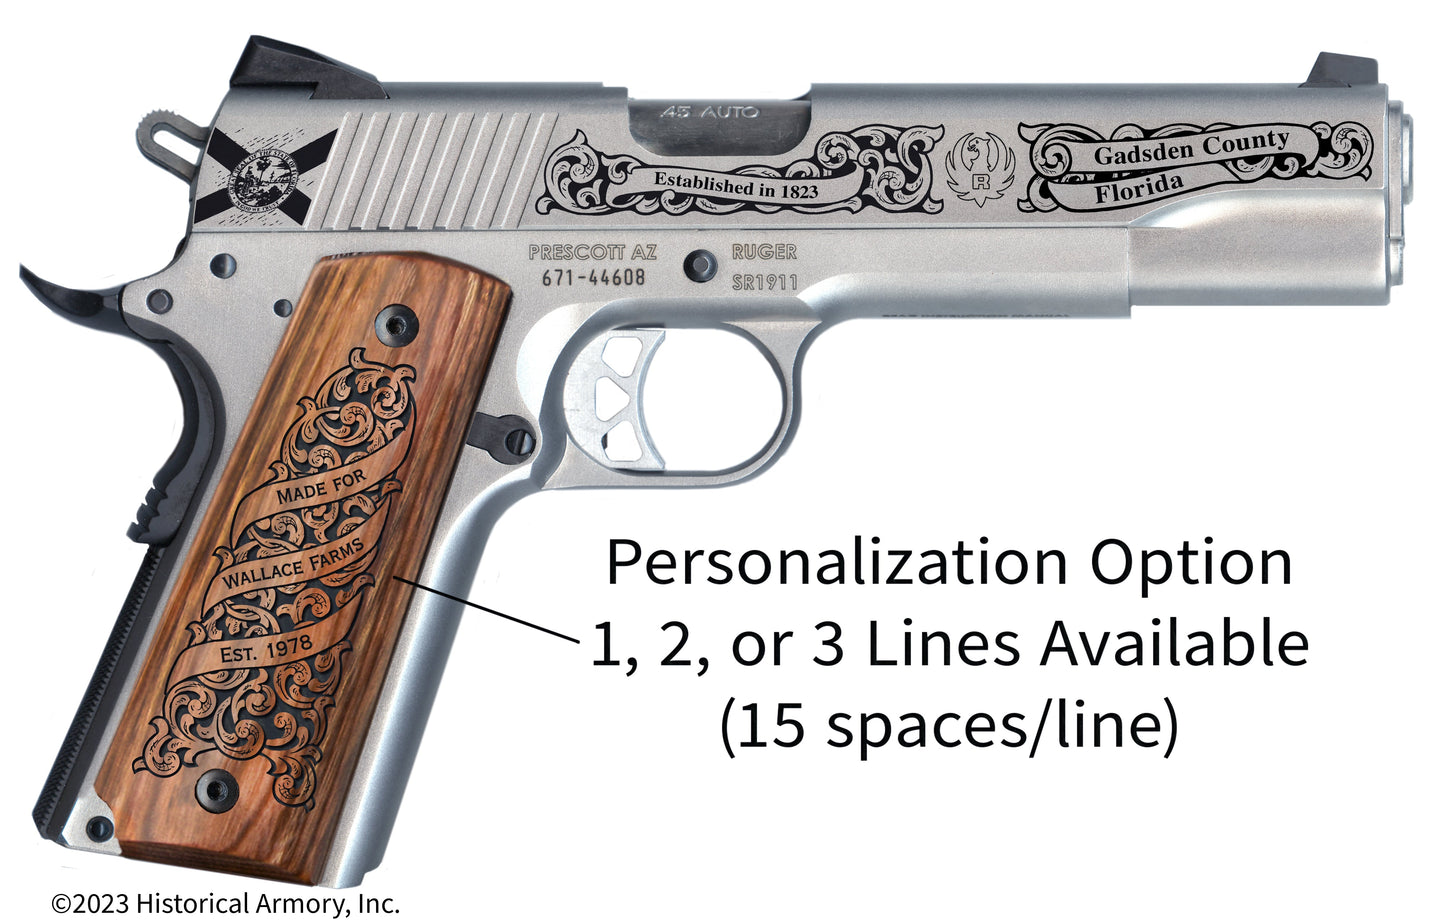 Gadsden County Florida Personalized Engraved .45 Auto Ruger 1911